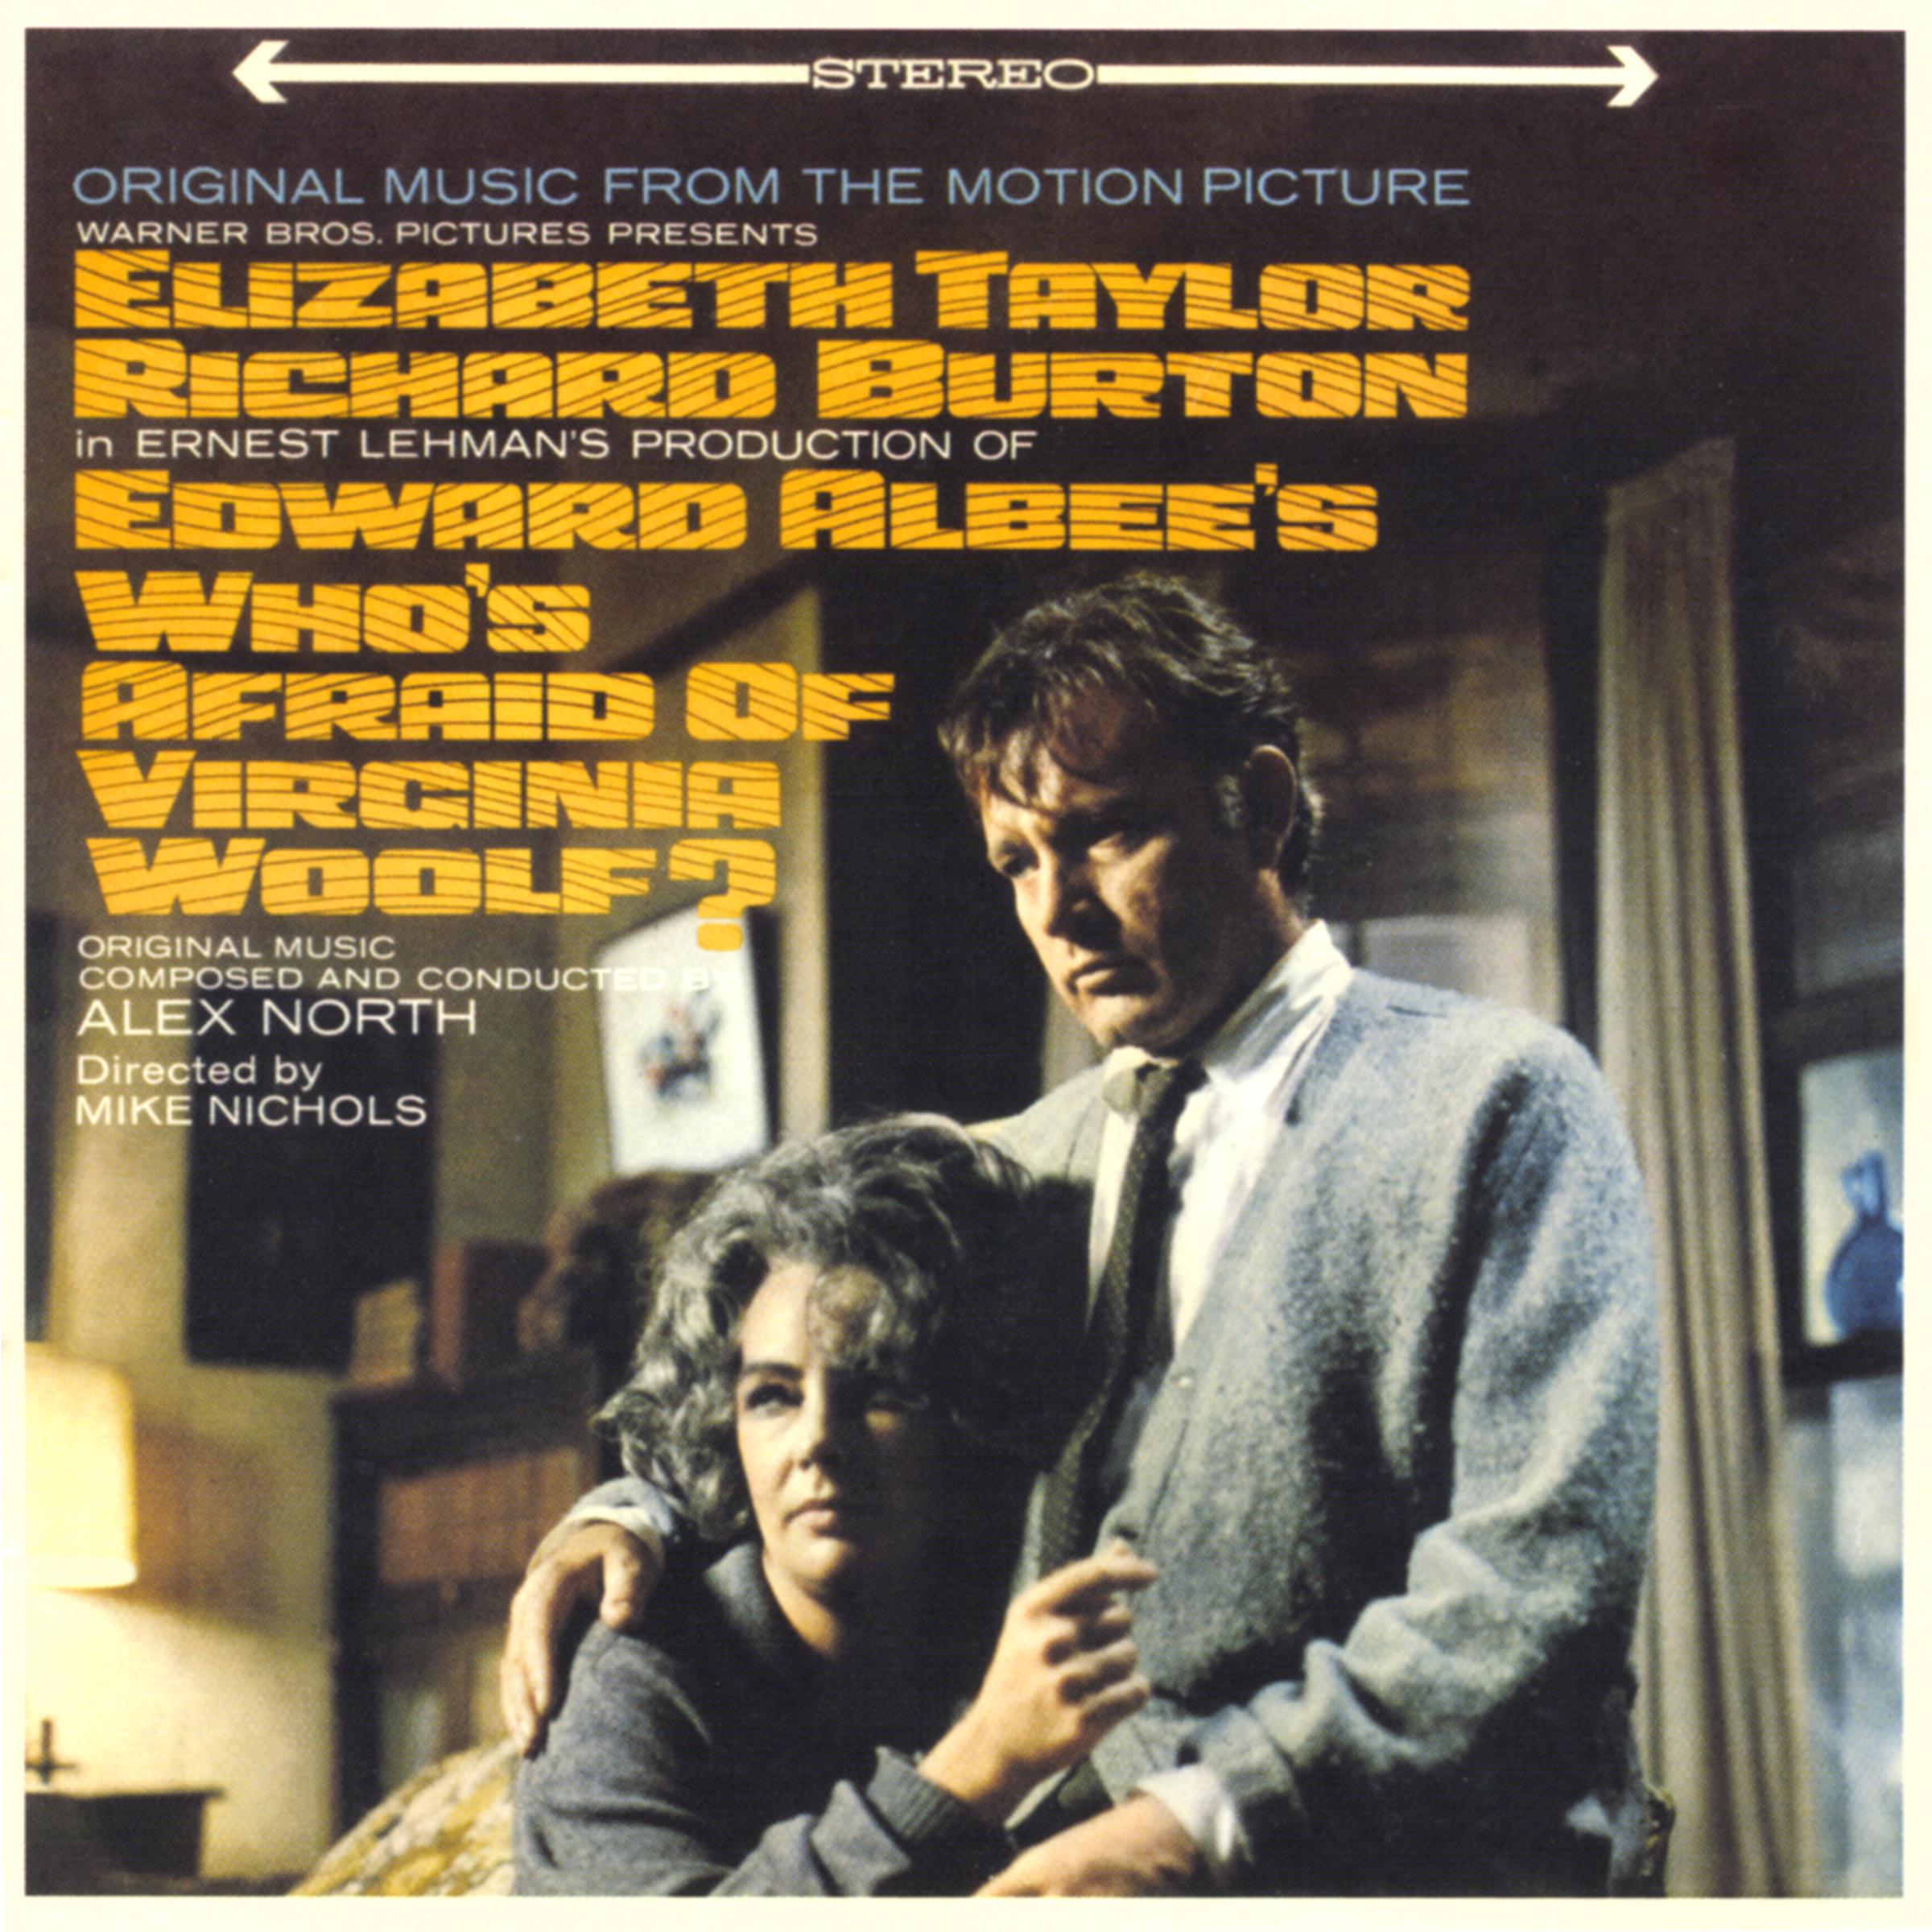 Original Music From The Warner Bros. Motion Picture Who's Afraid Of Virginia Woolf?